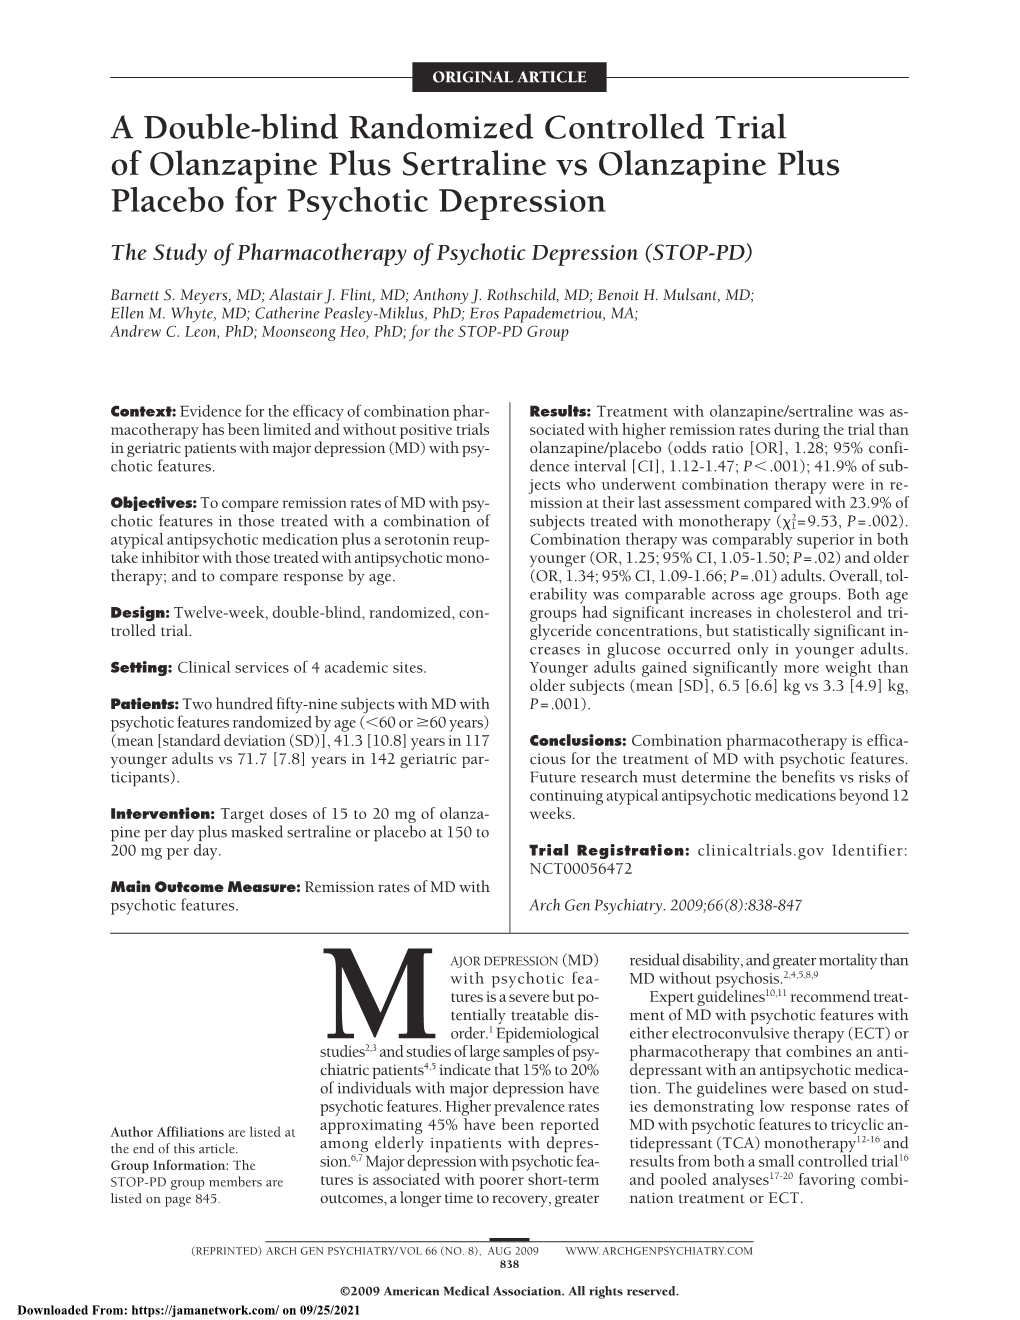 A Double-Blind Randomized Controlled Trial of Olanzapine Plus Sertraline Vs Olanzapine Plus Placebo for Psychotic Depression